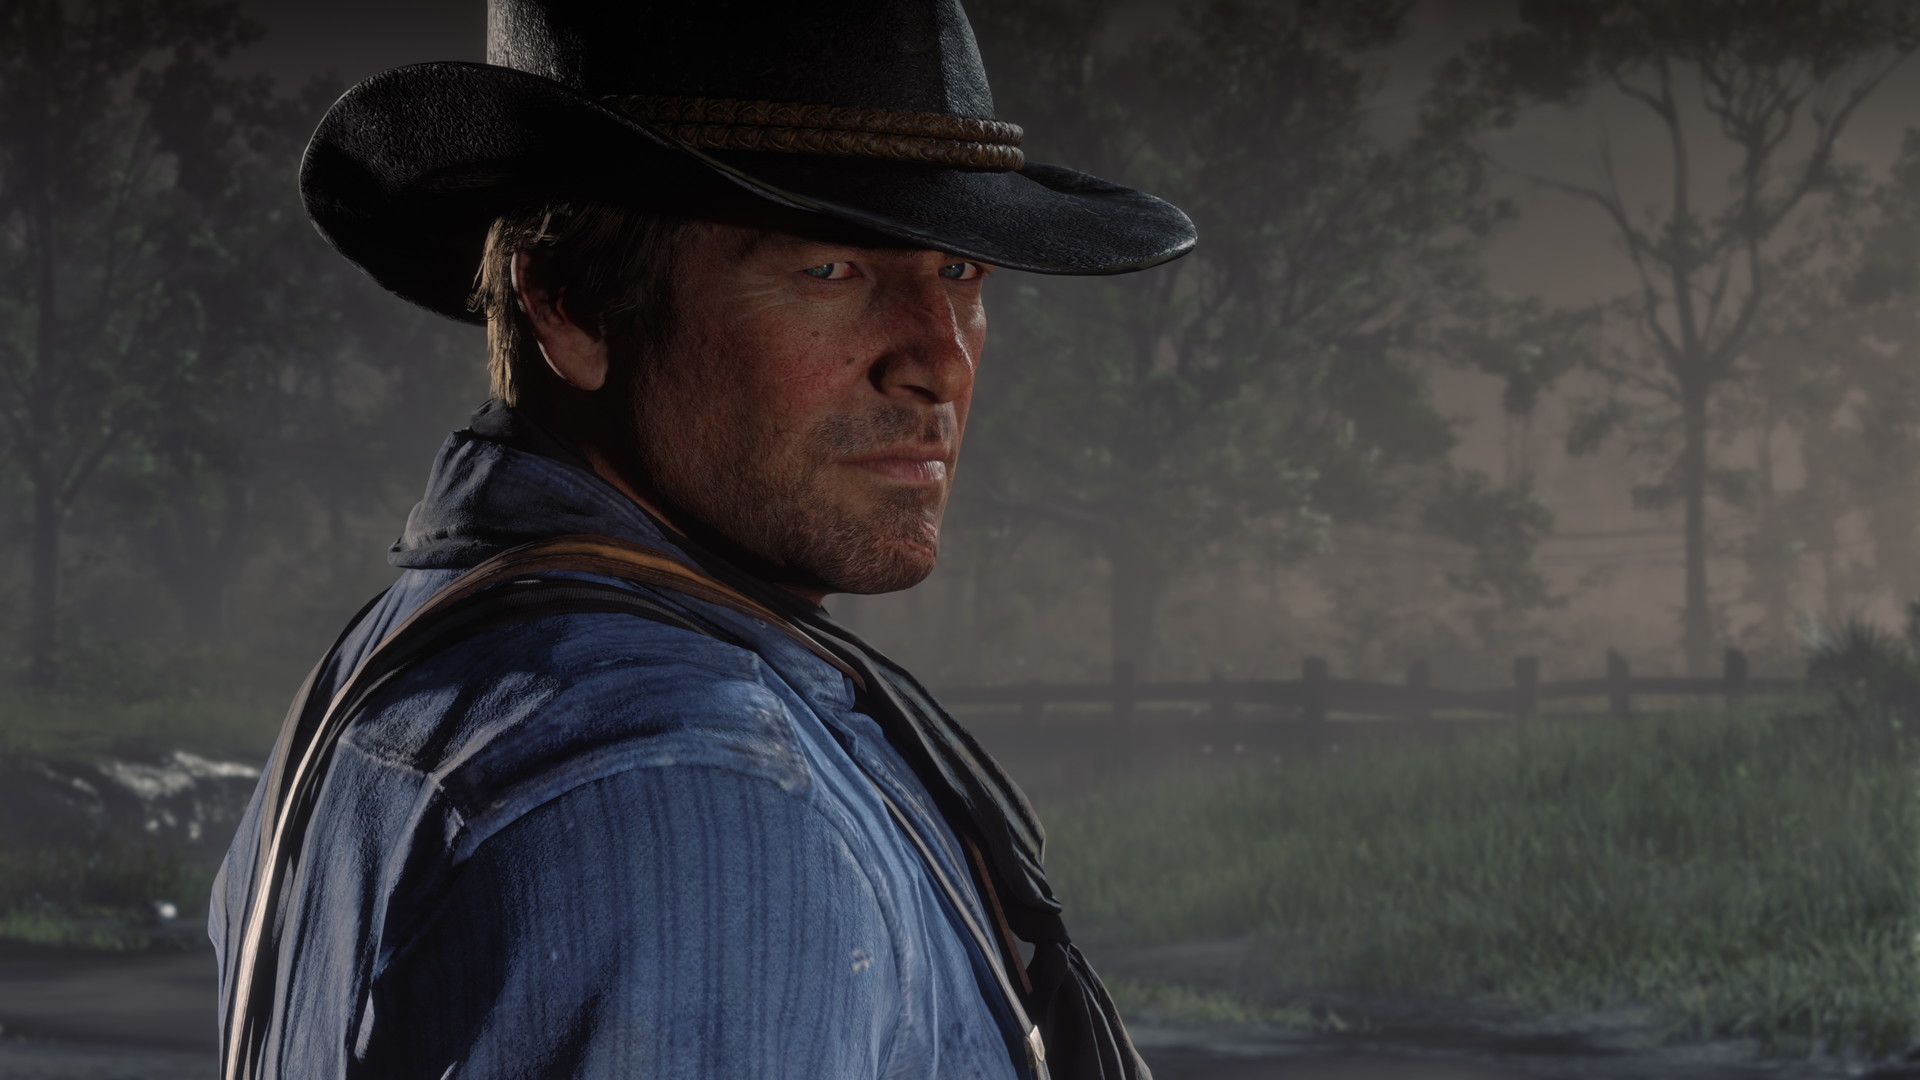 Game One PH - Outlaws for life. PS4  Xbox One Red Dead Redemption 2 is now  available for PRE-ORDER at Game One PH An epic tale of life in America at